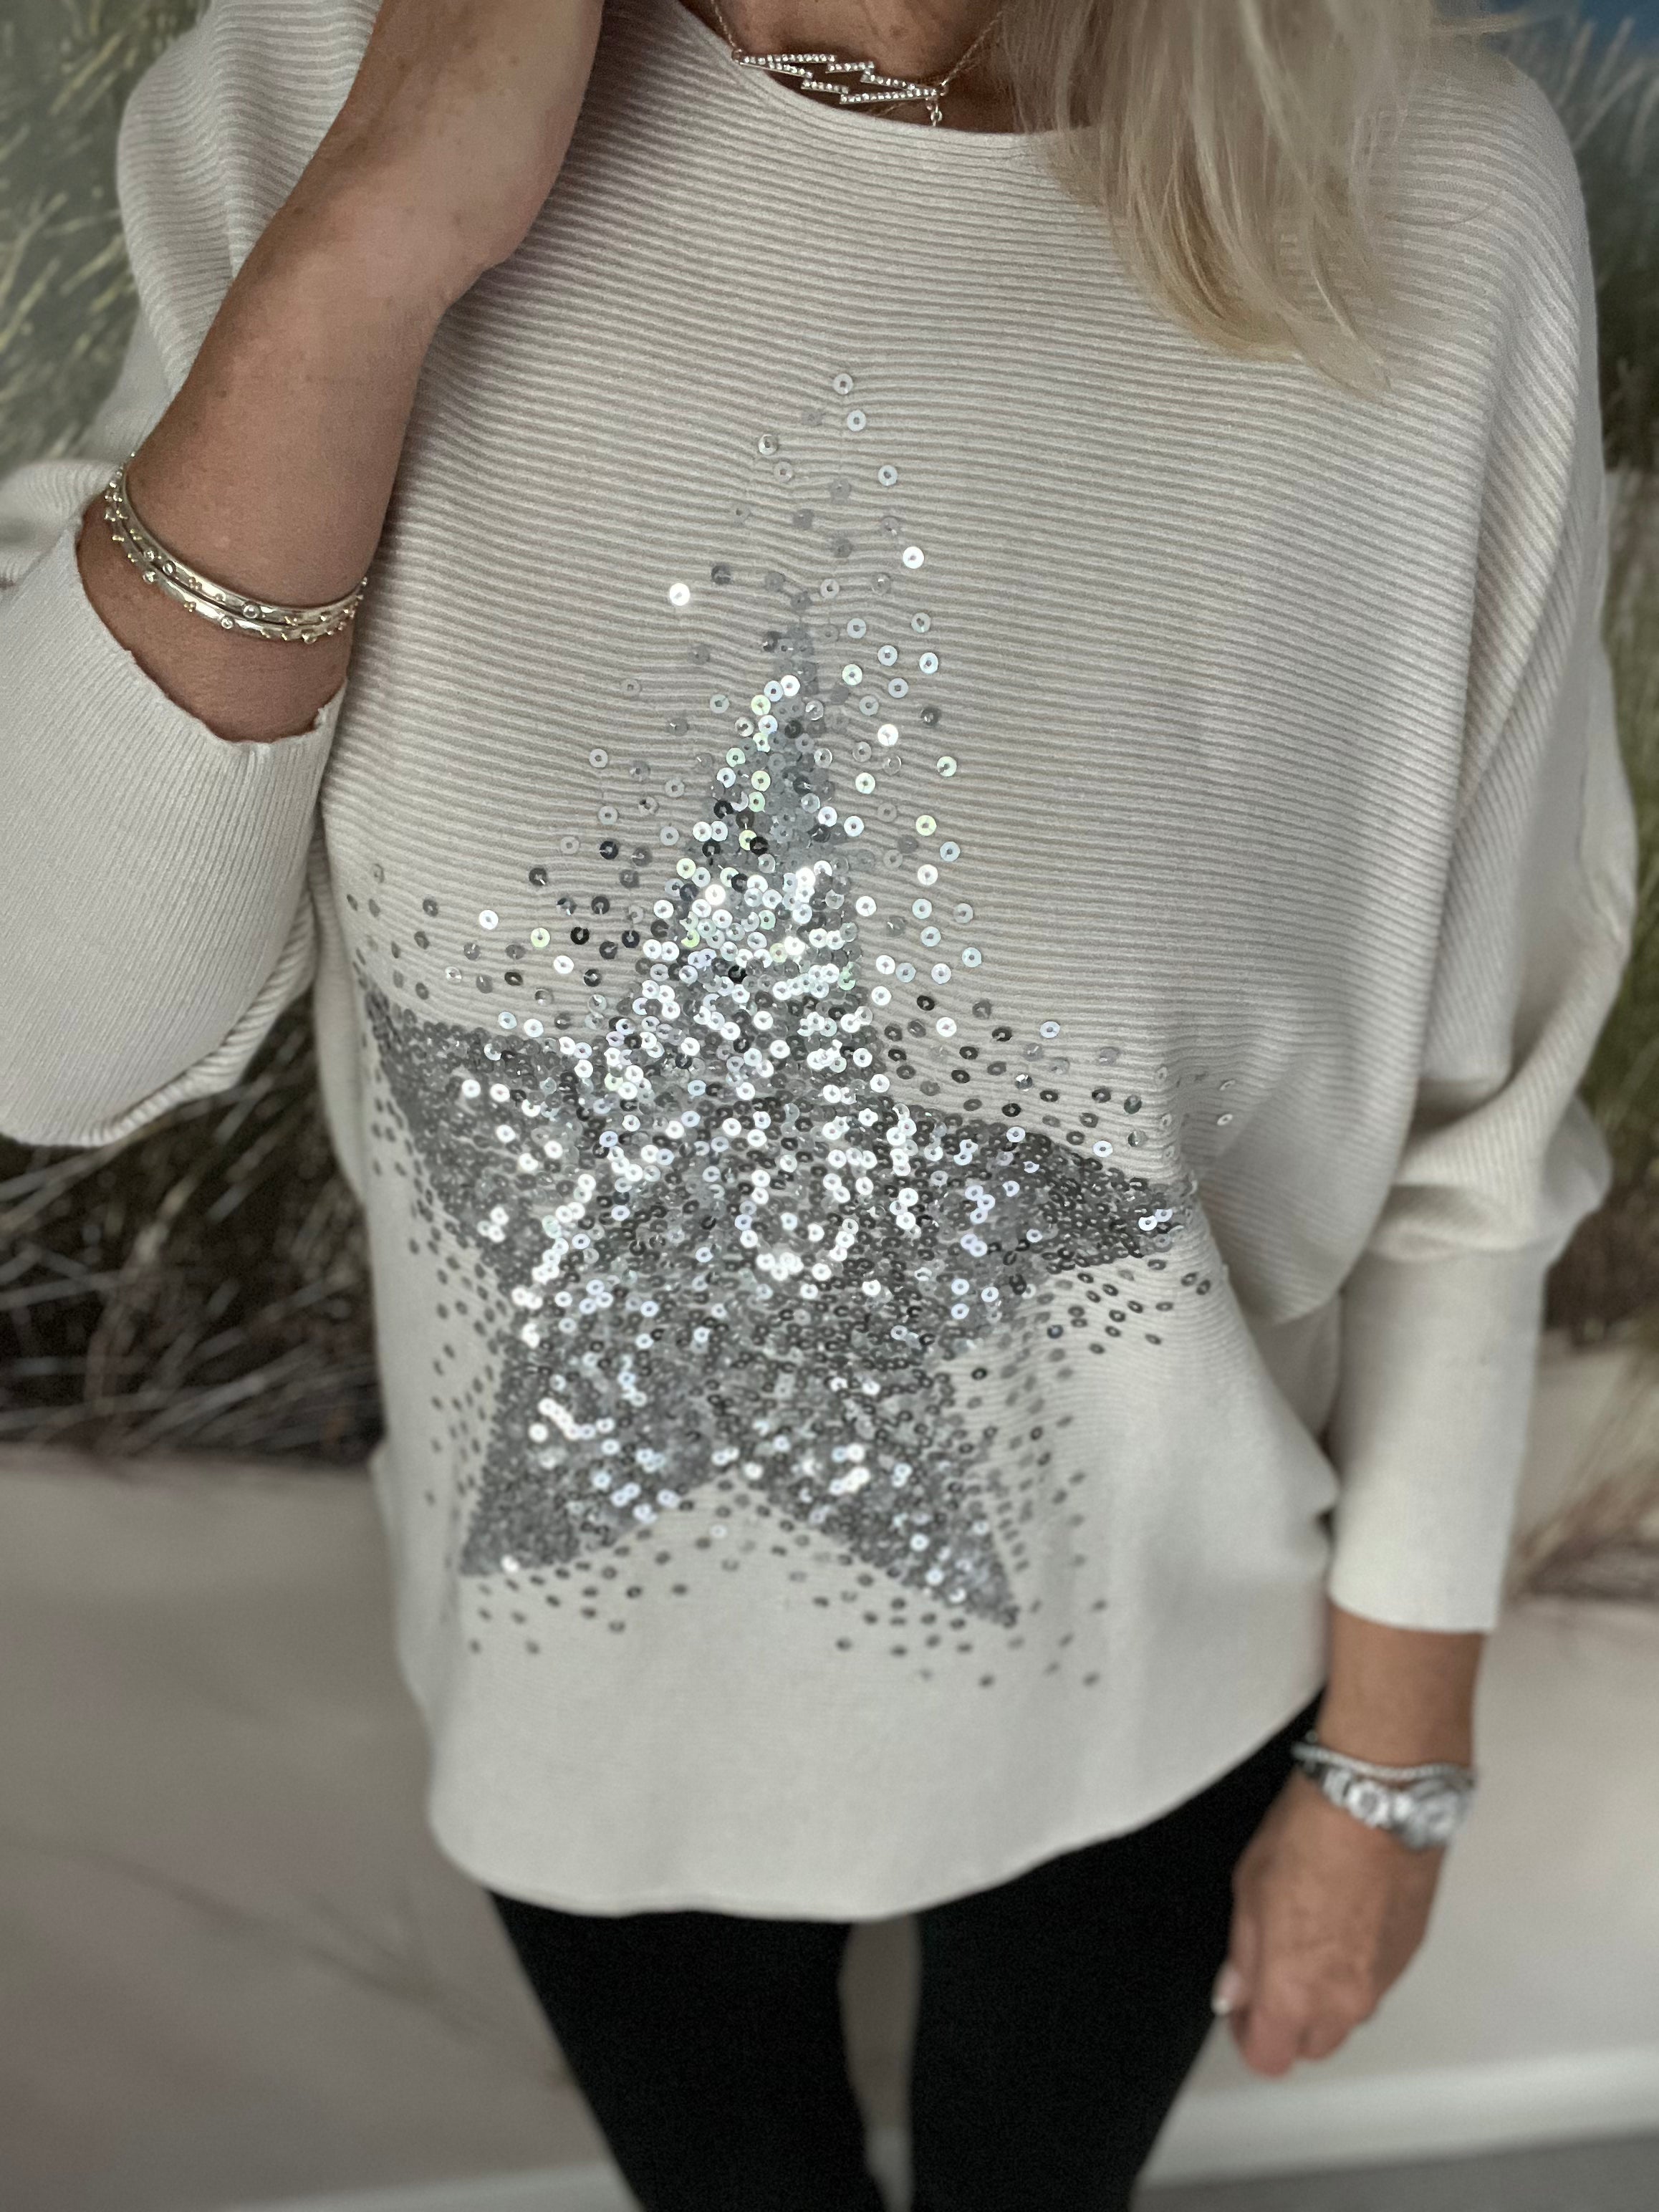 Ribbed Sequin Star Jumper in Stone